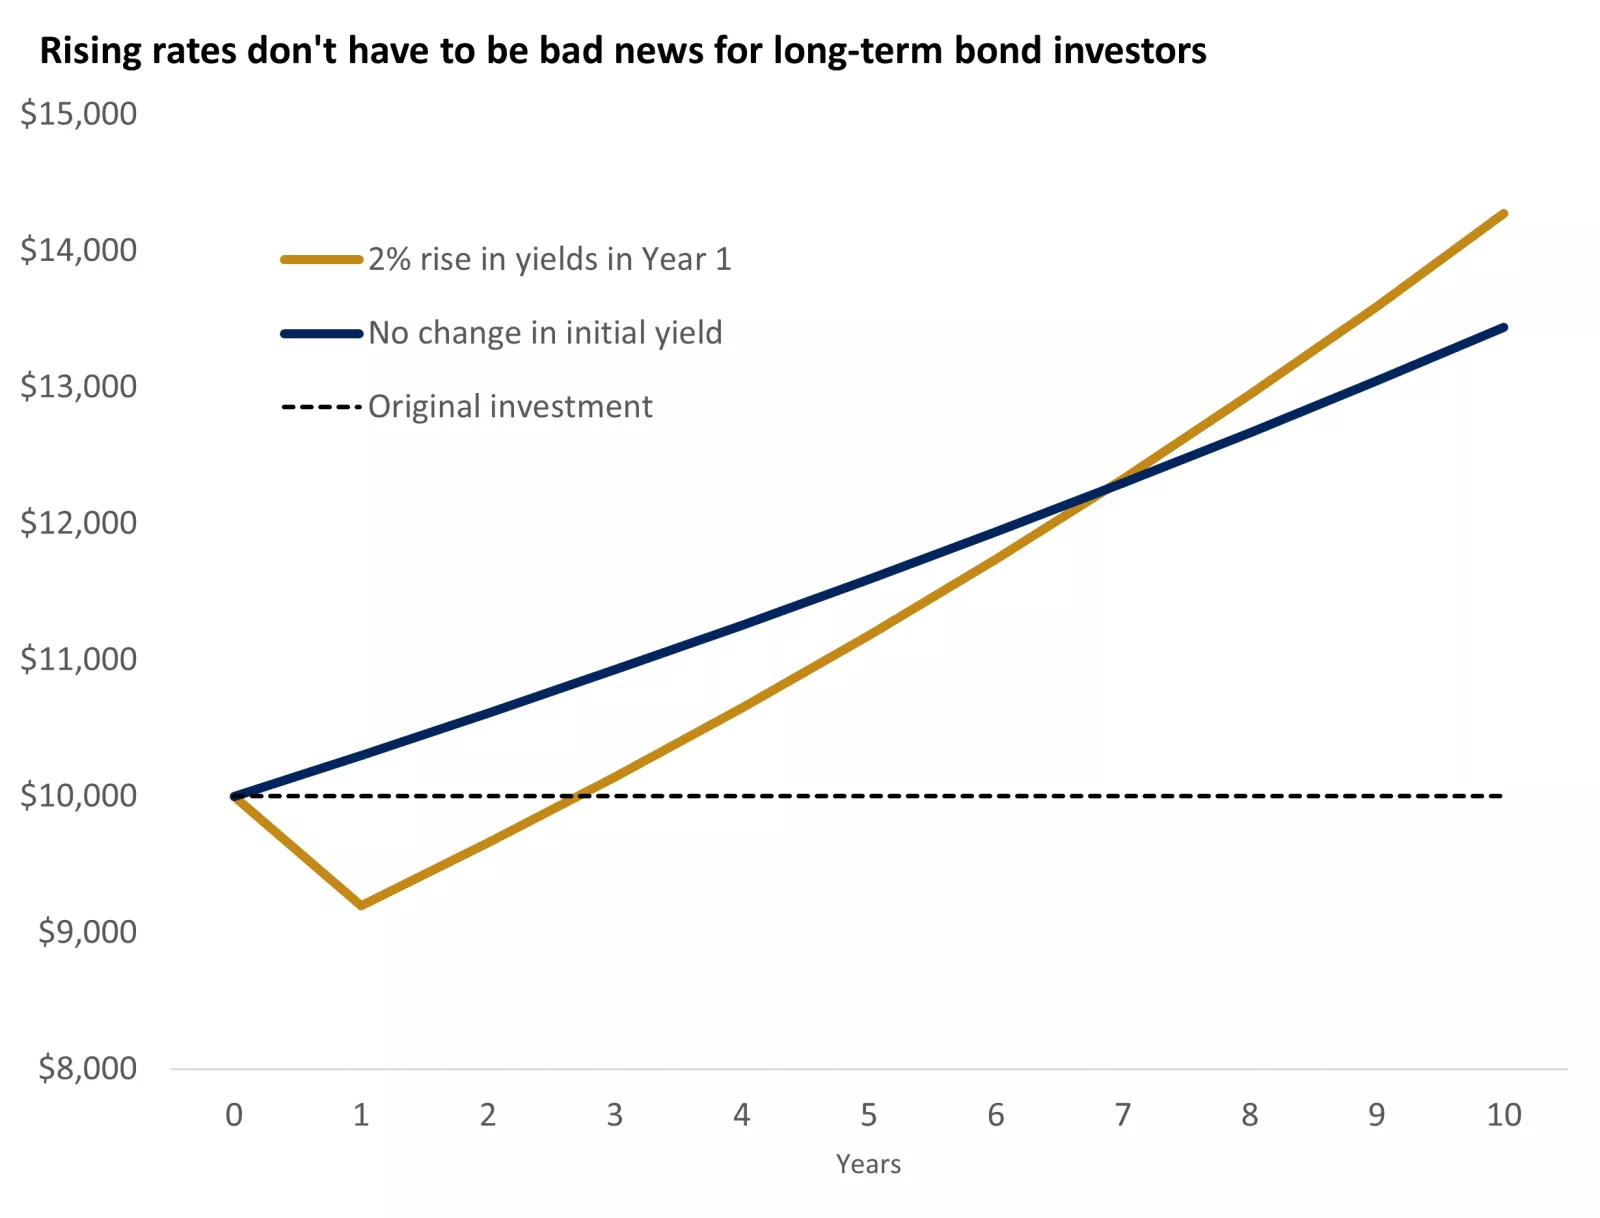 The graph shows the estimated performance of a fixed-income investment assuming a parallel rate rise of 2% and no changes in rates thereafter.